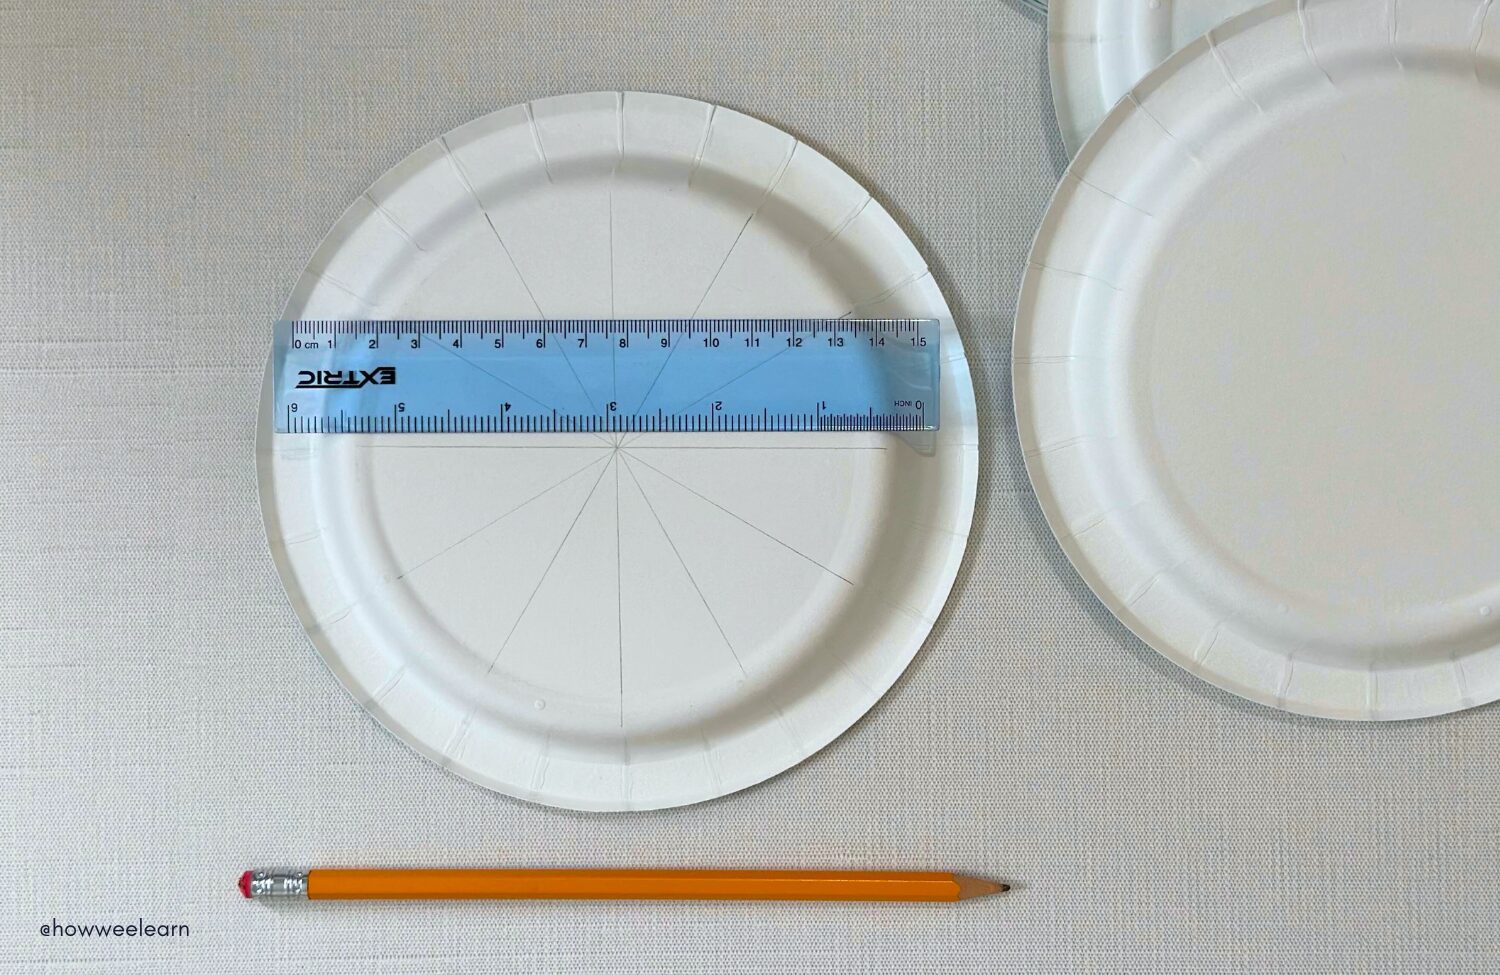 Dividing a paper plate into 12 equal sections